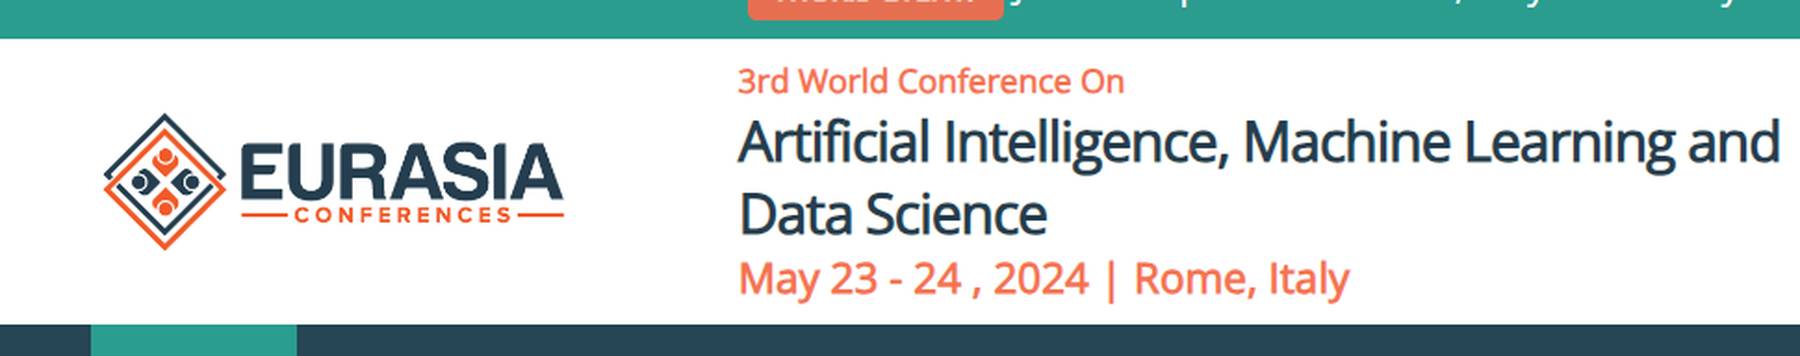 Artificial Intelligence, Machine Learning and Data Science 2024